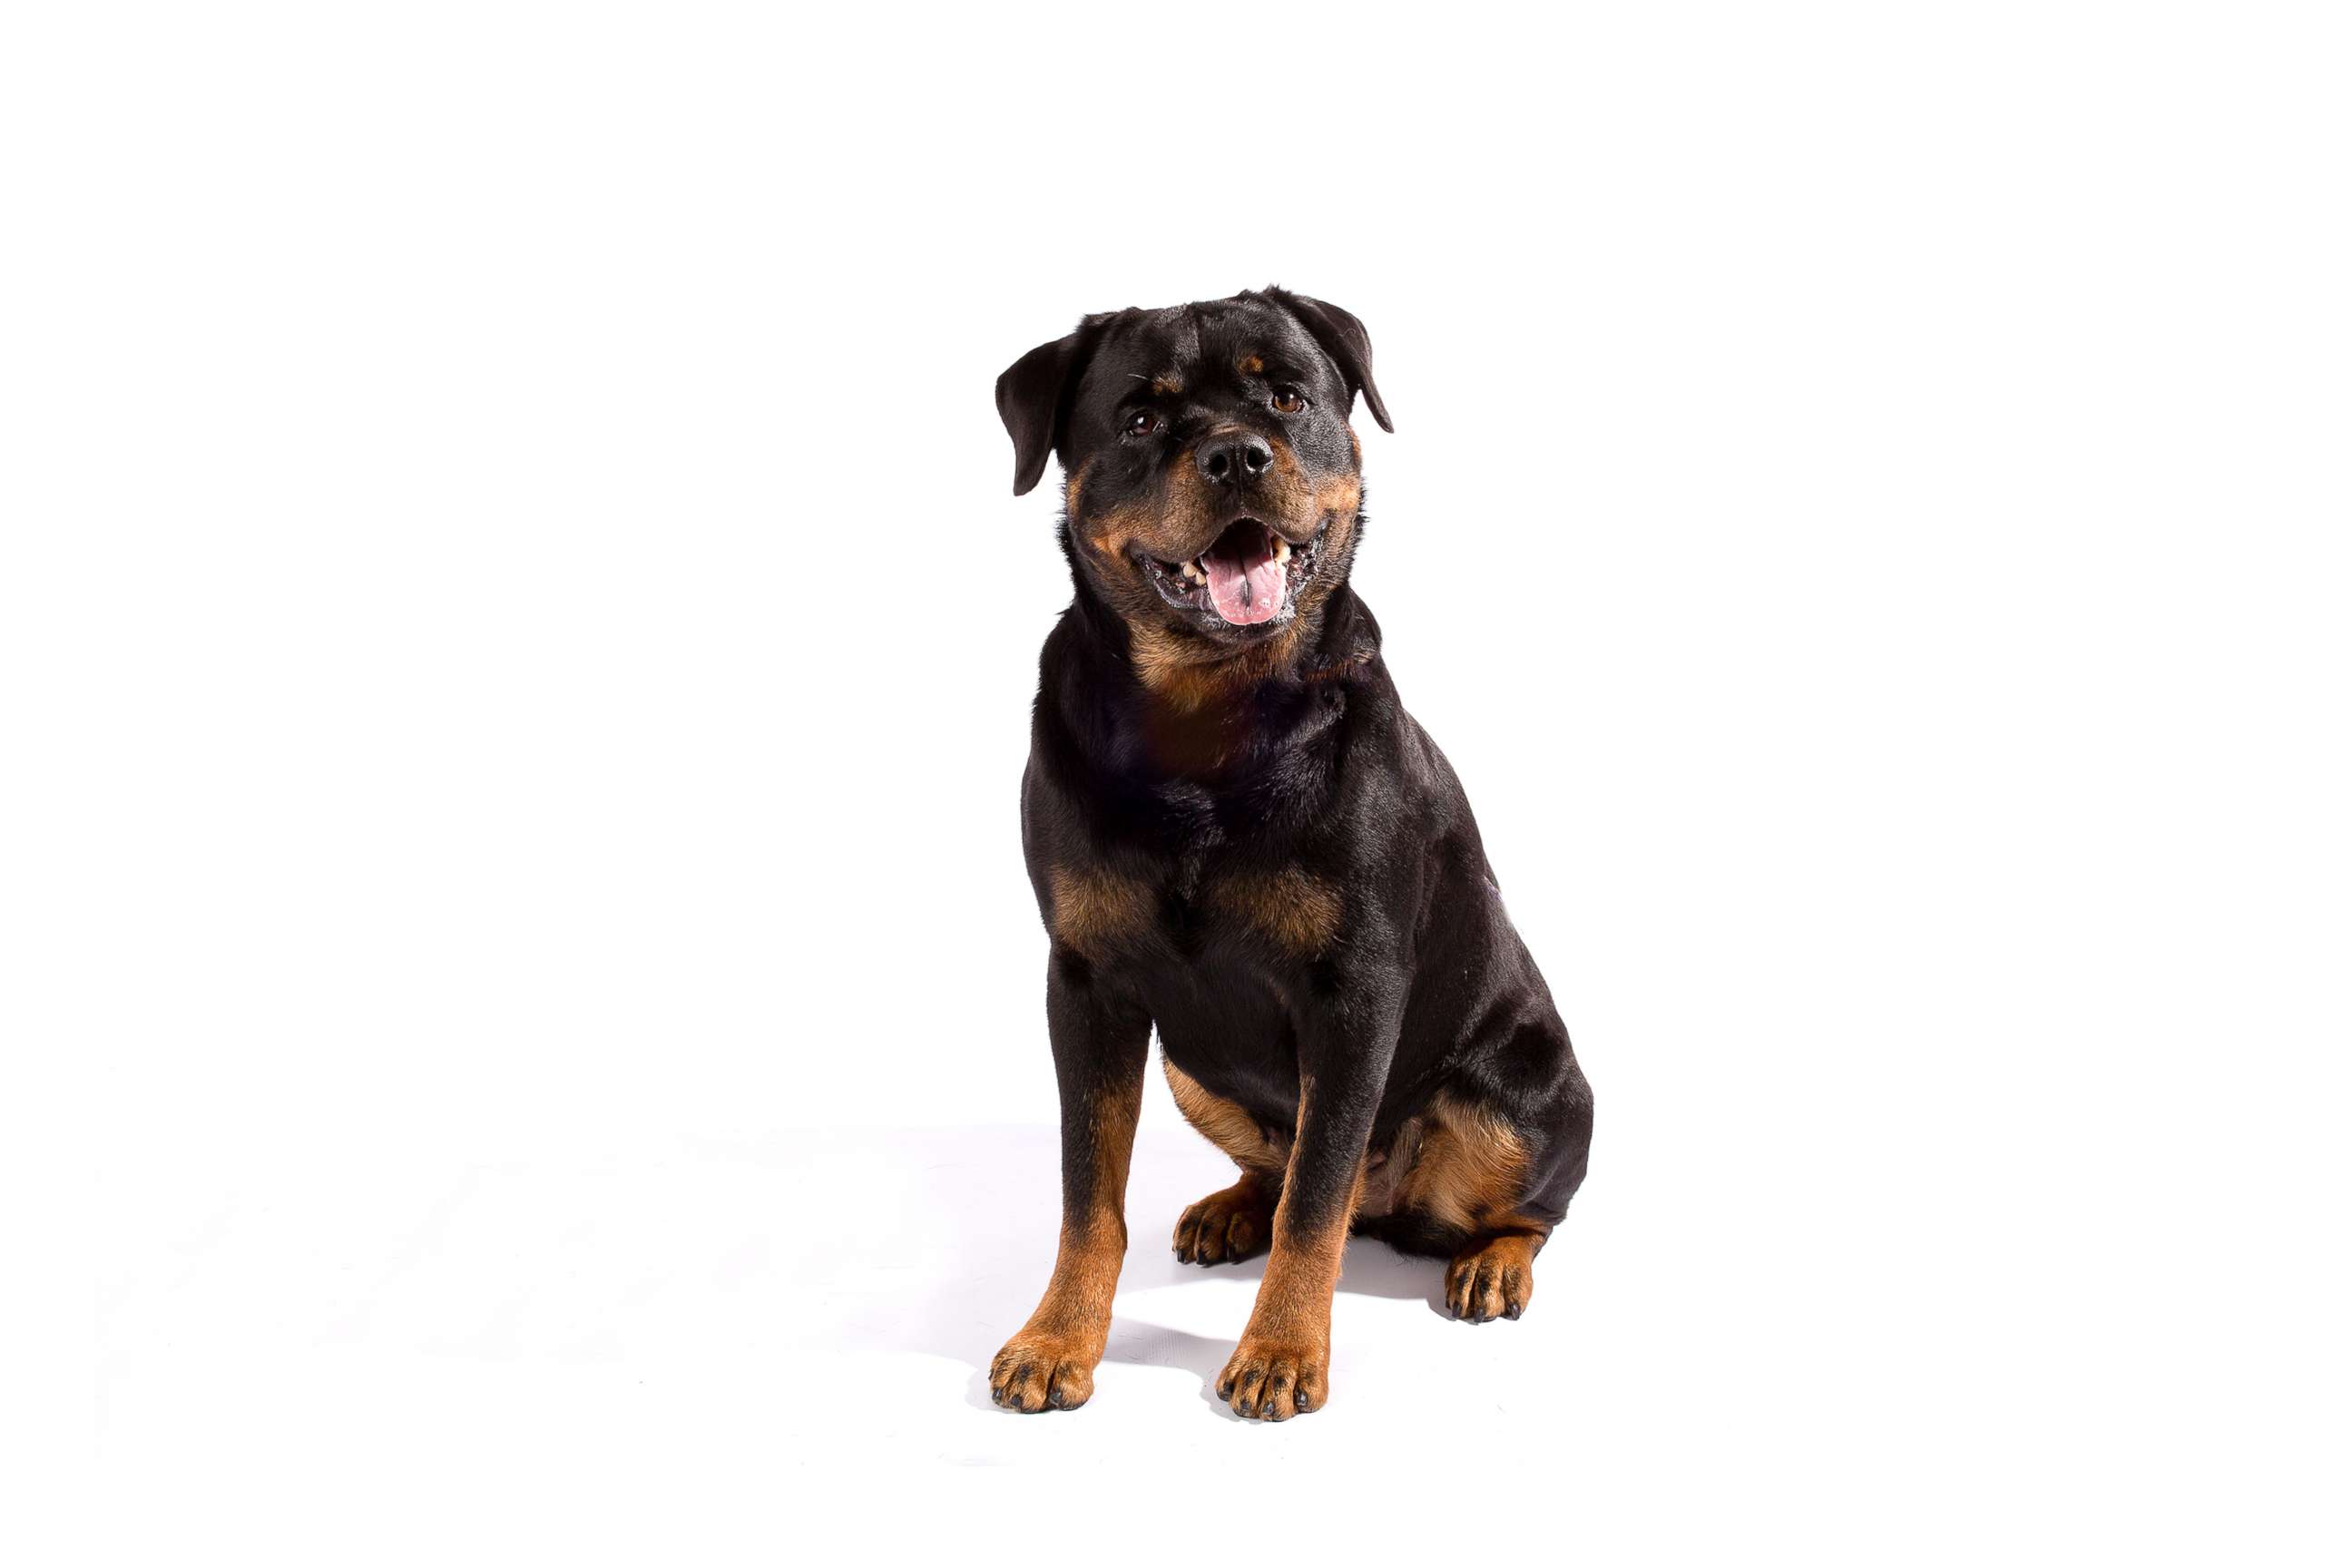 PHOTO: Rottweilers are No. 8 on the AKC's most popular dog breeds of 2018.